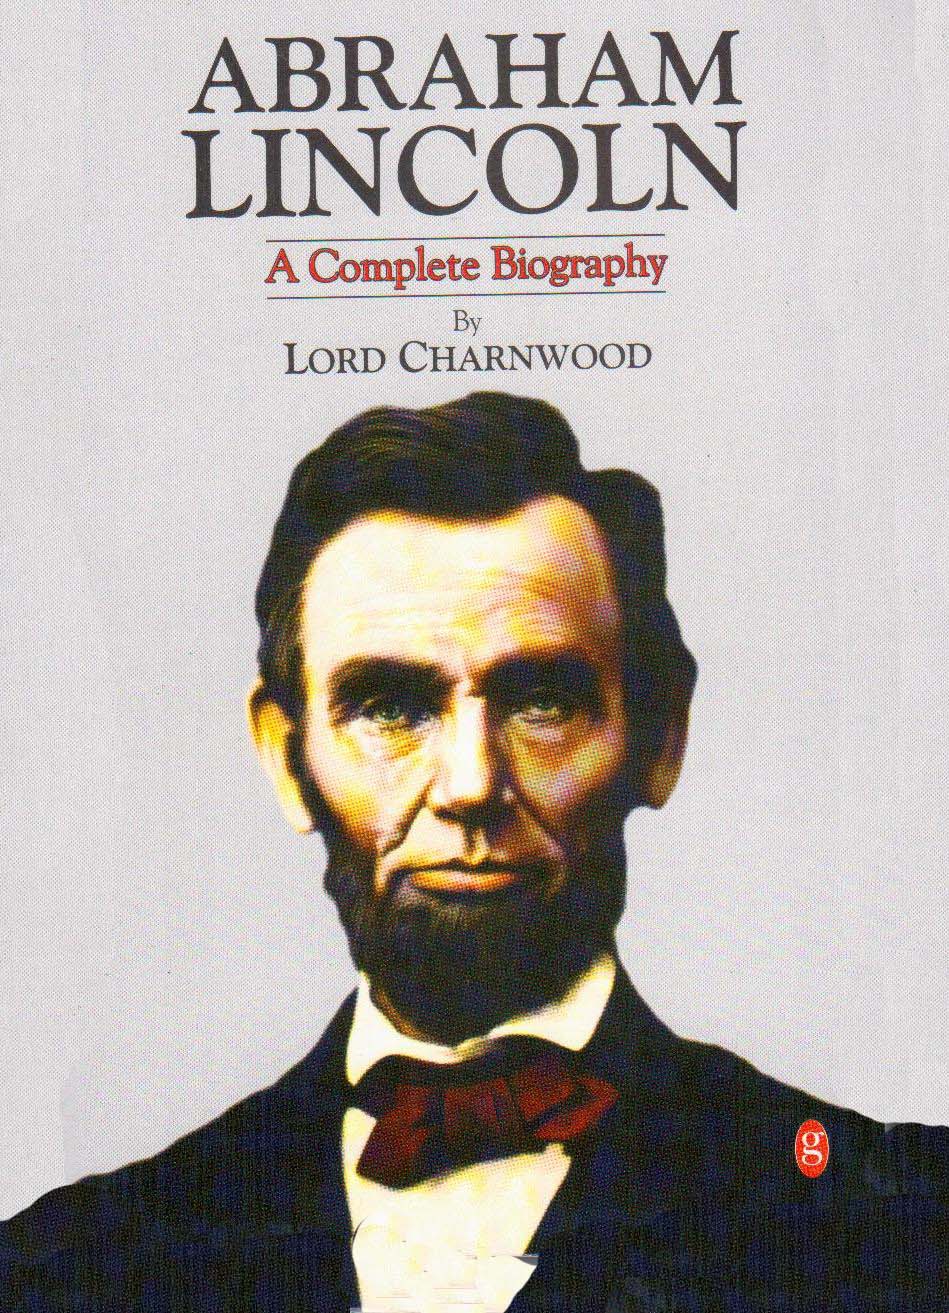 Abraham Lincoln : A Complete Biography, Lord Charnwood, 8188951471